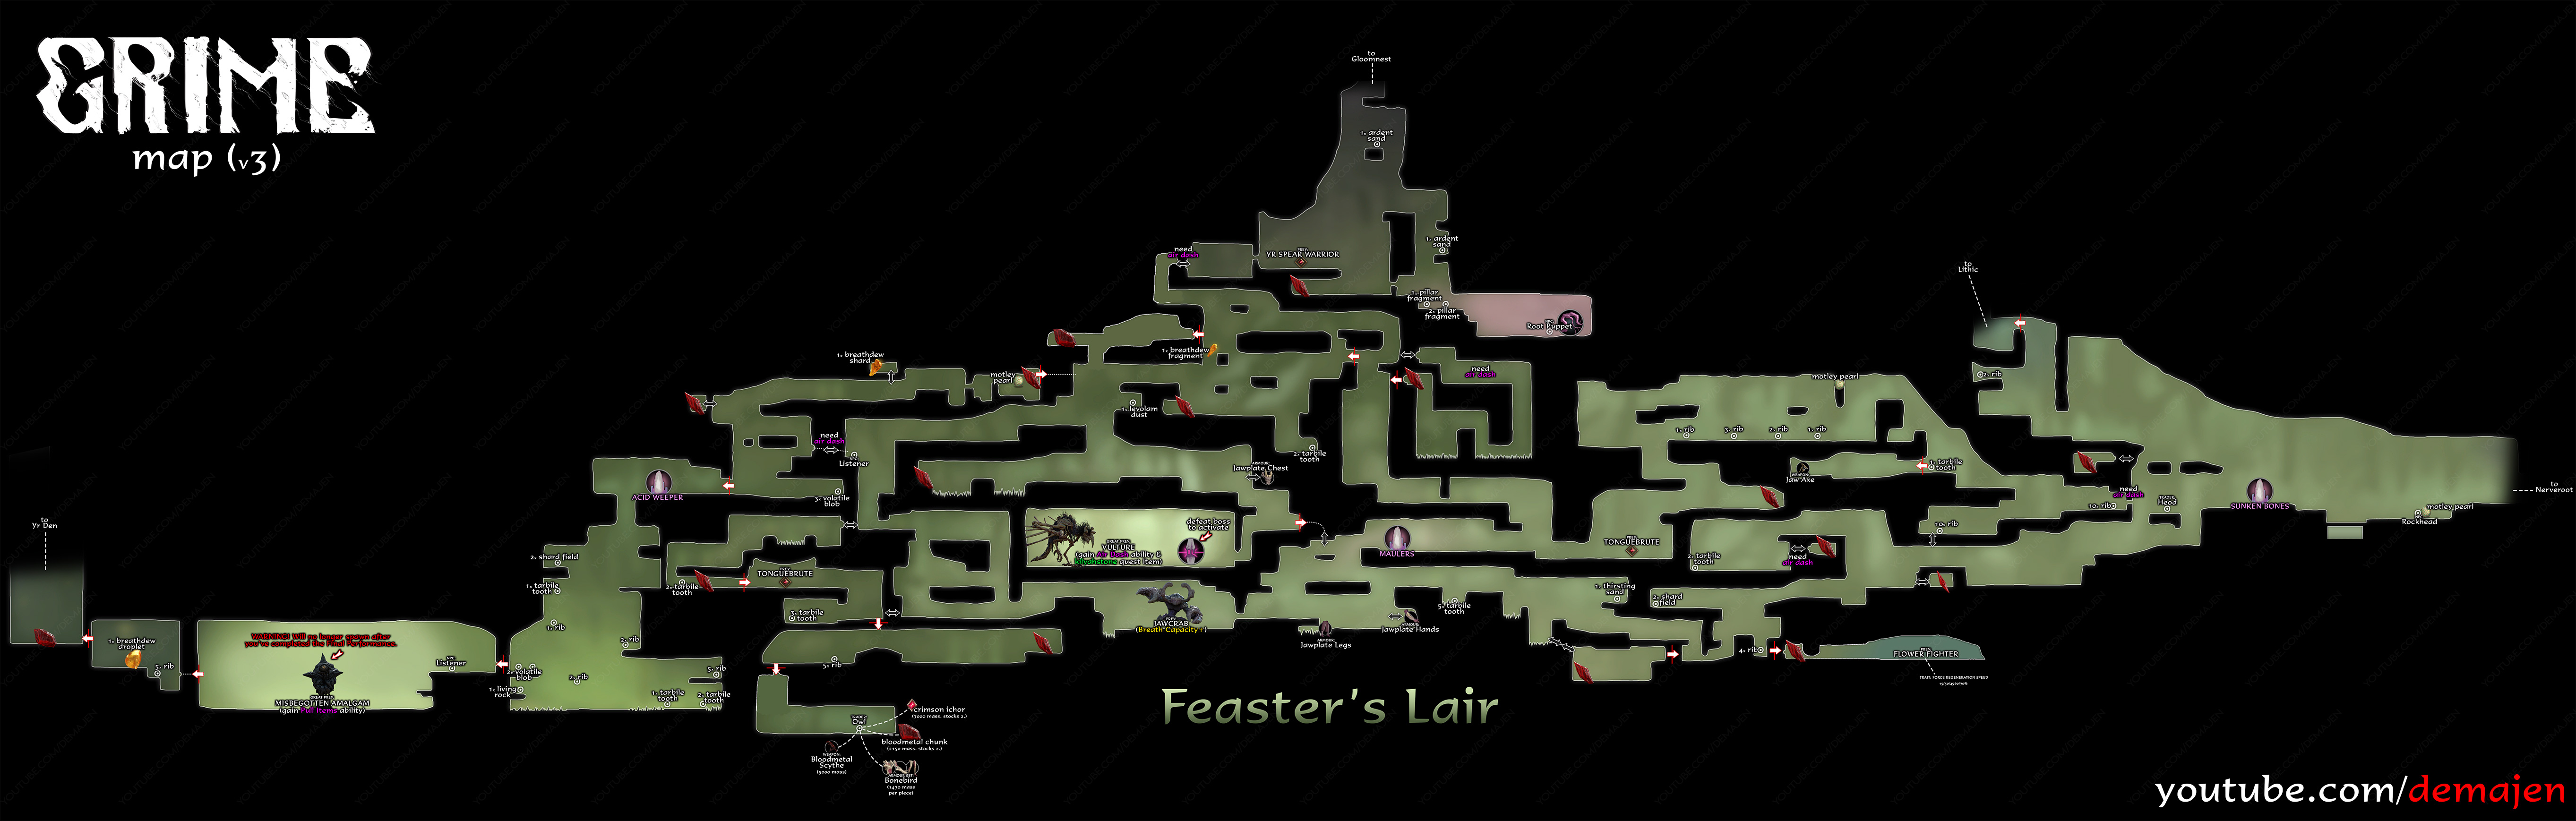 GRIME - All Maps in Game + All Checkpoint Locations - Feaster's Lair